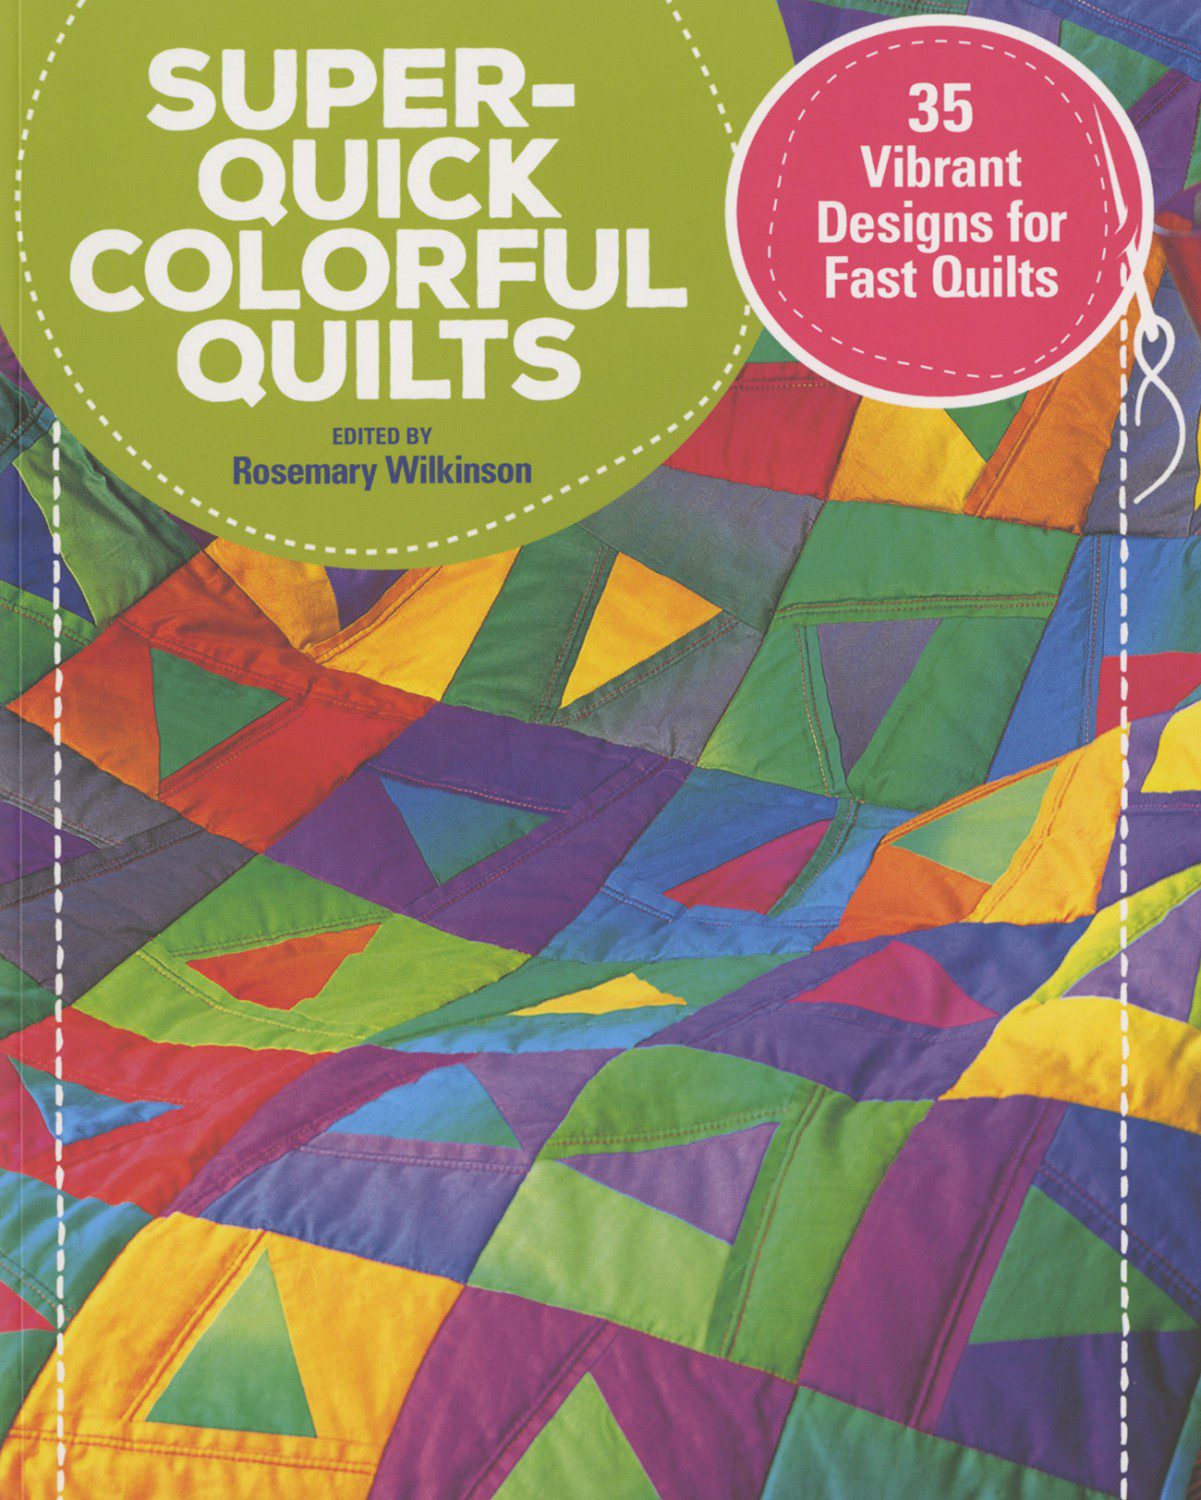 Super Quick Colorful Quilts - book